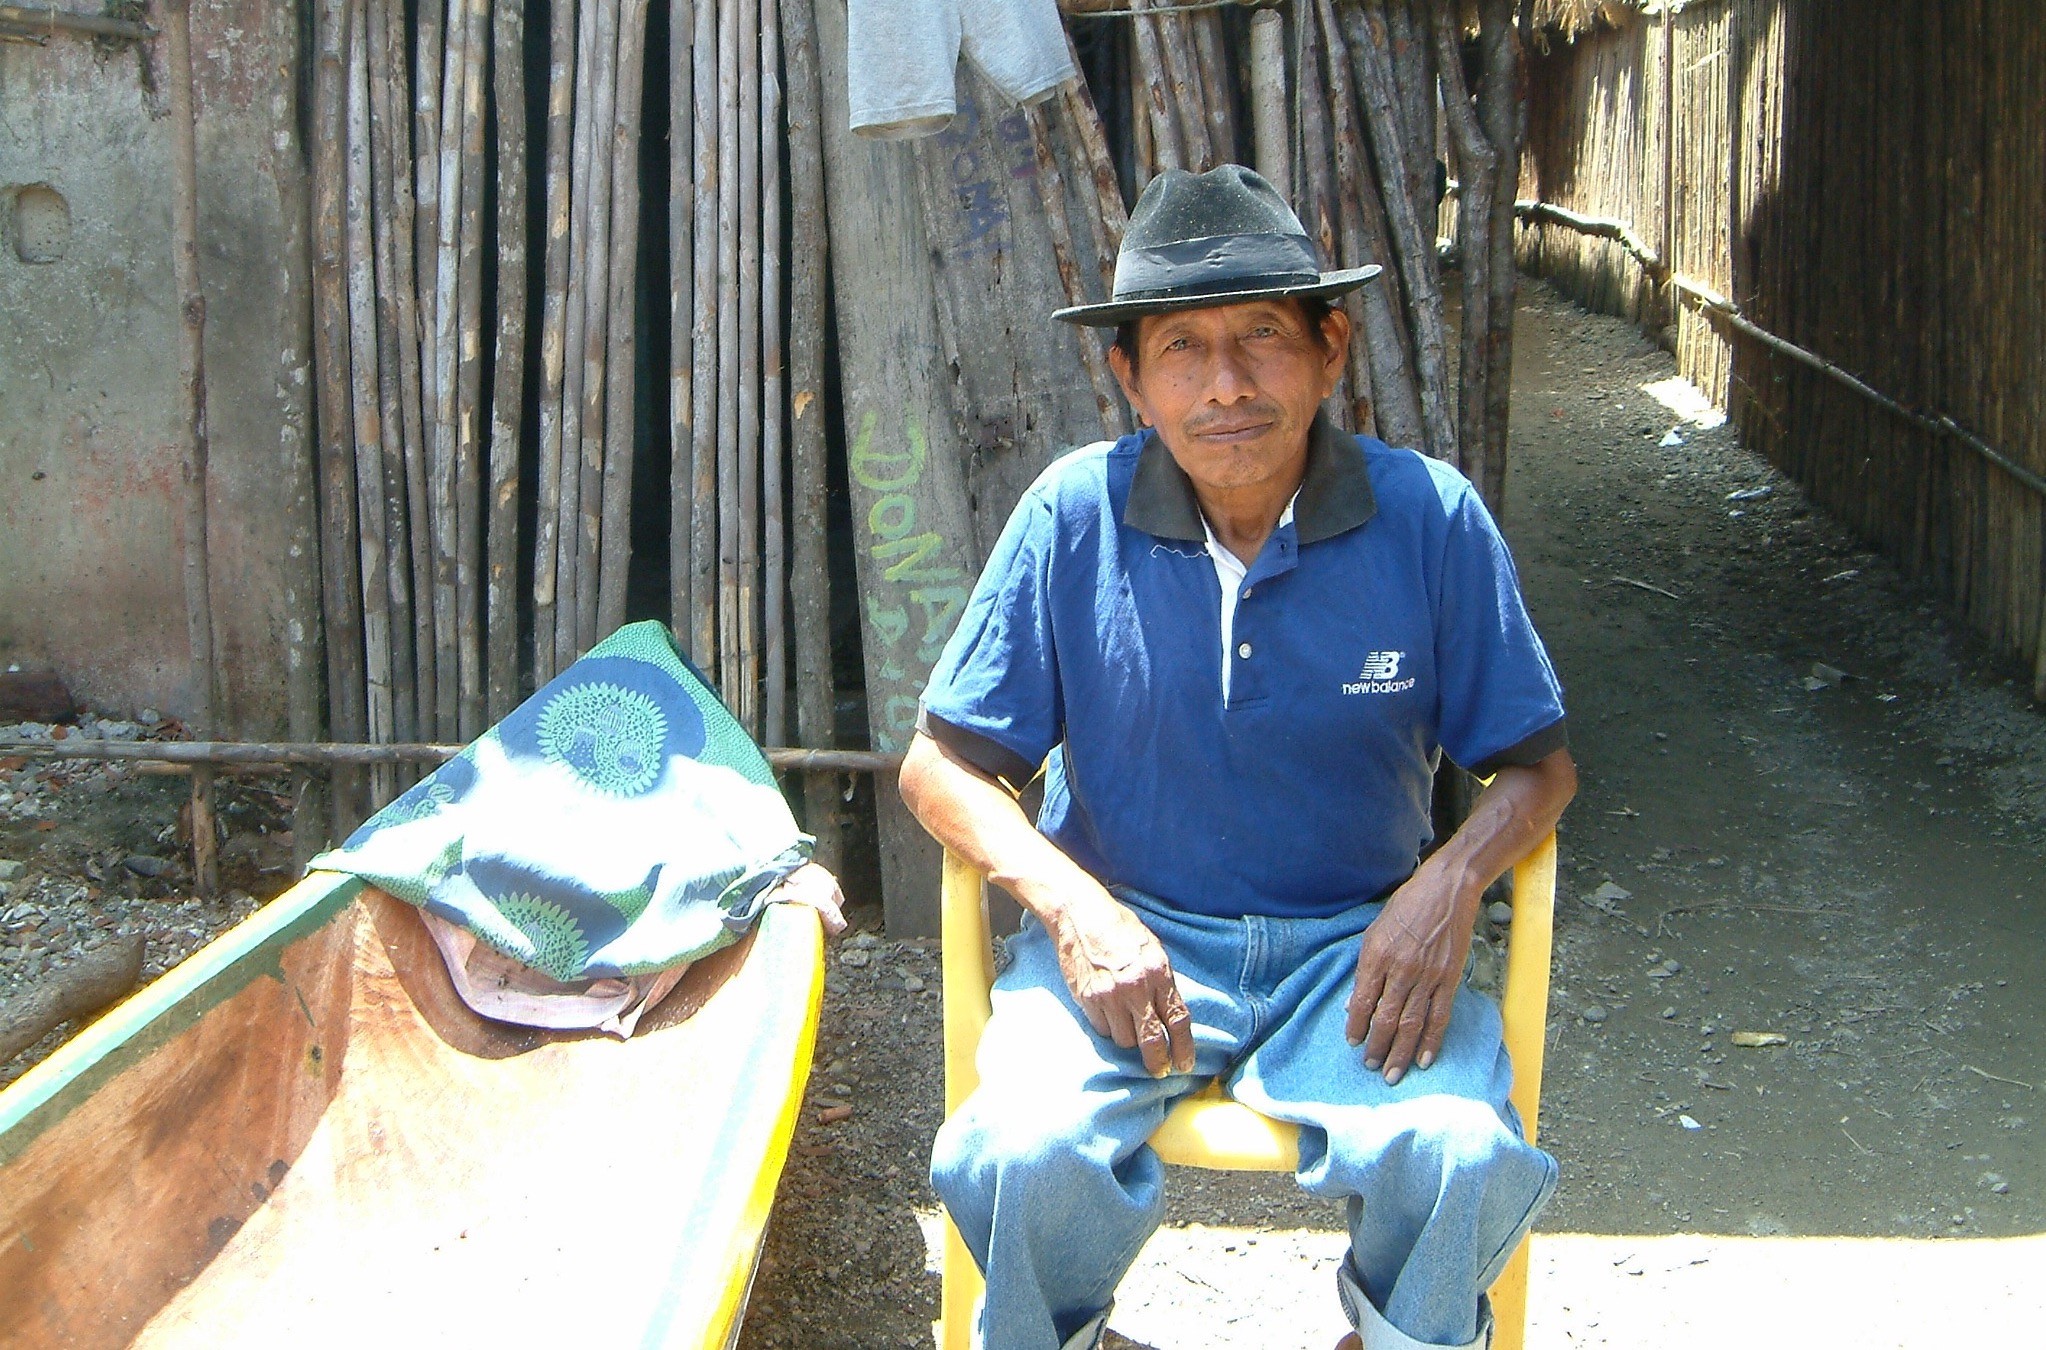 Man sitting in a chair outside a wooden shack in Panama